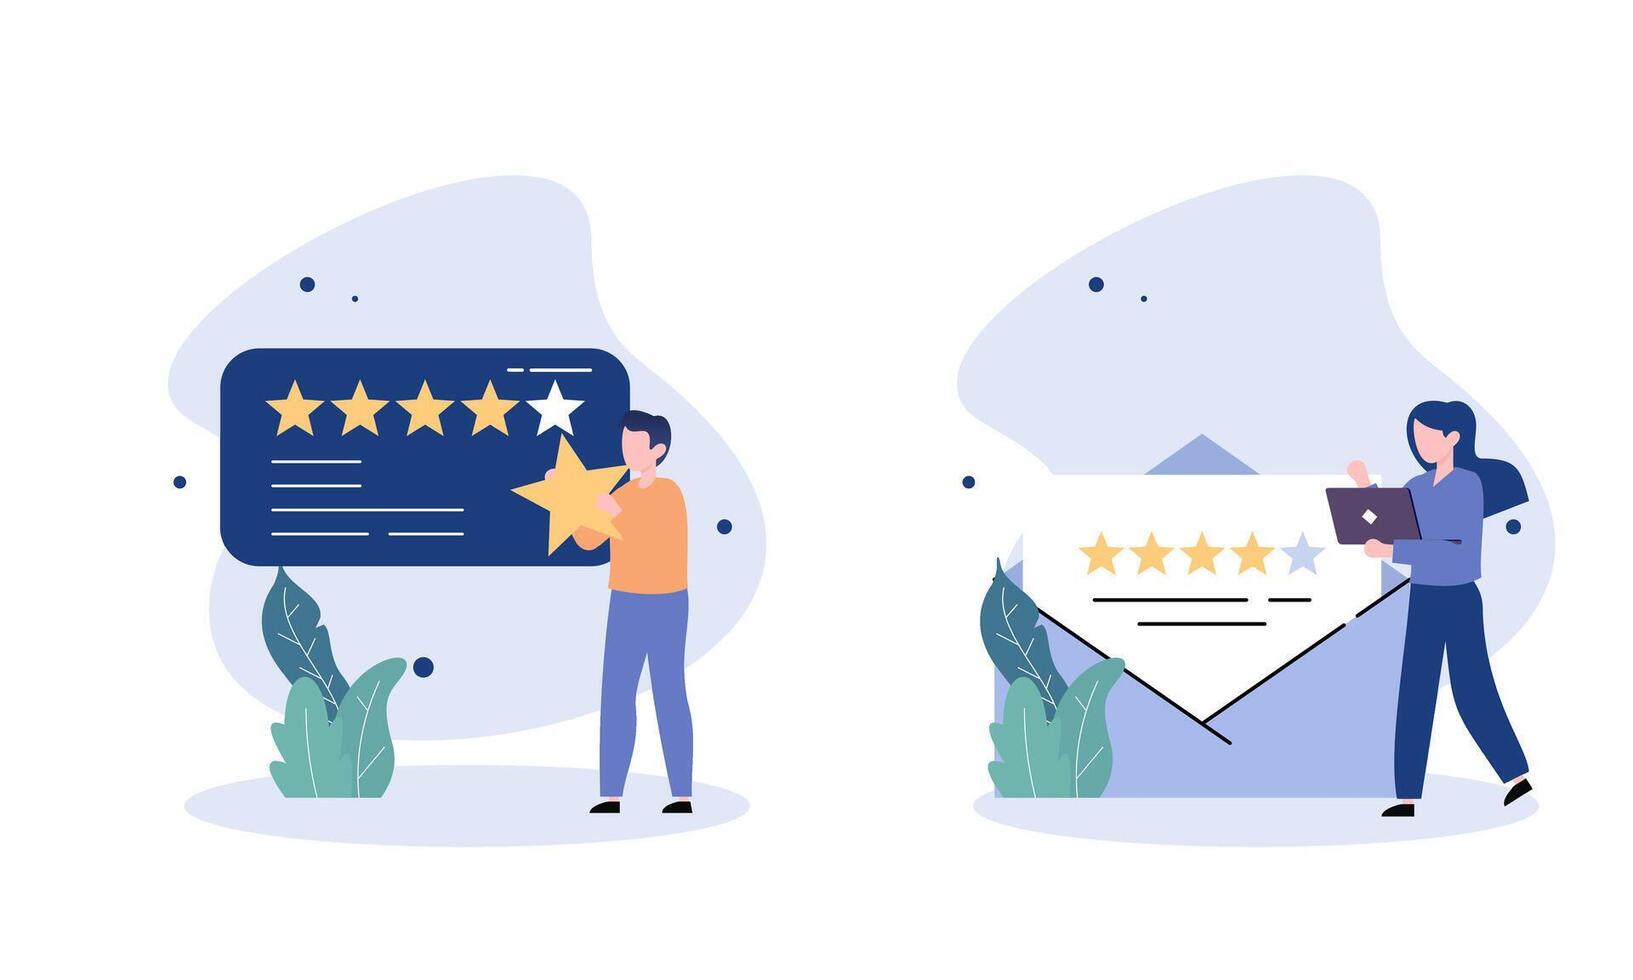 Feedback and review concept illustration vector